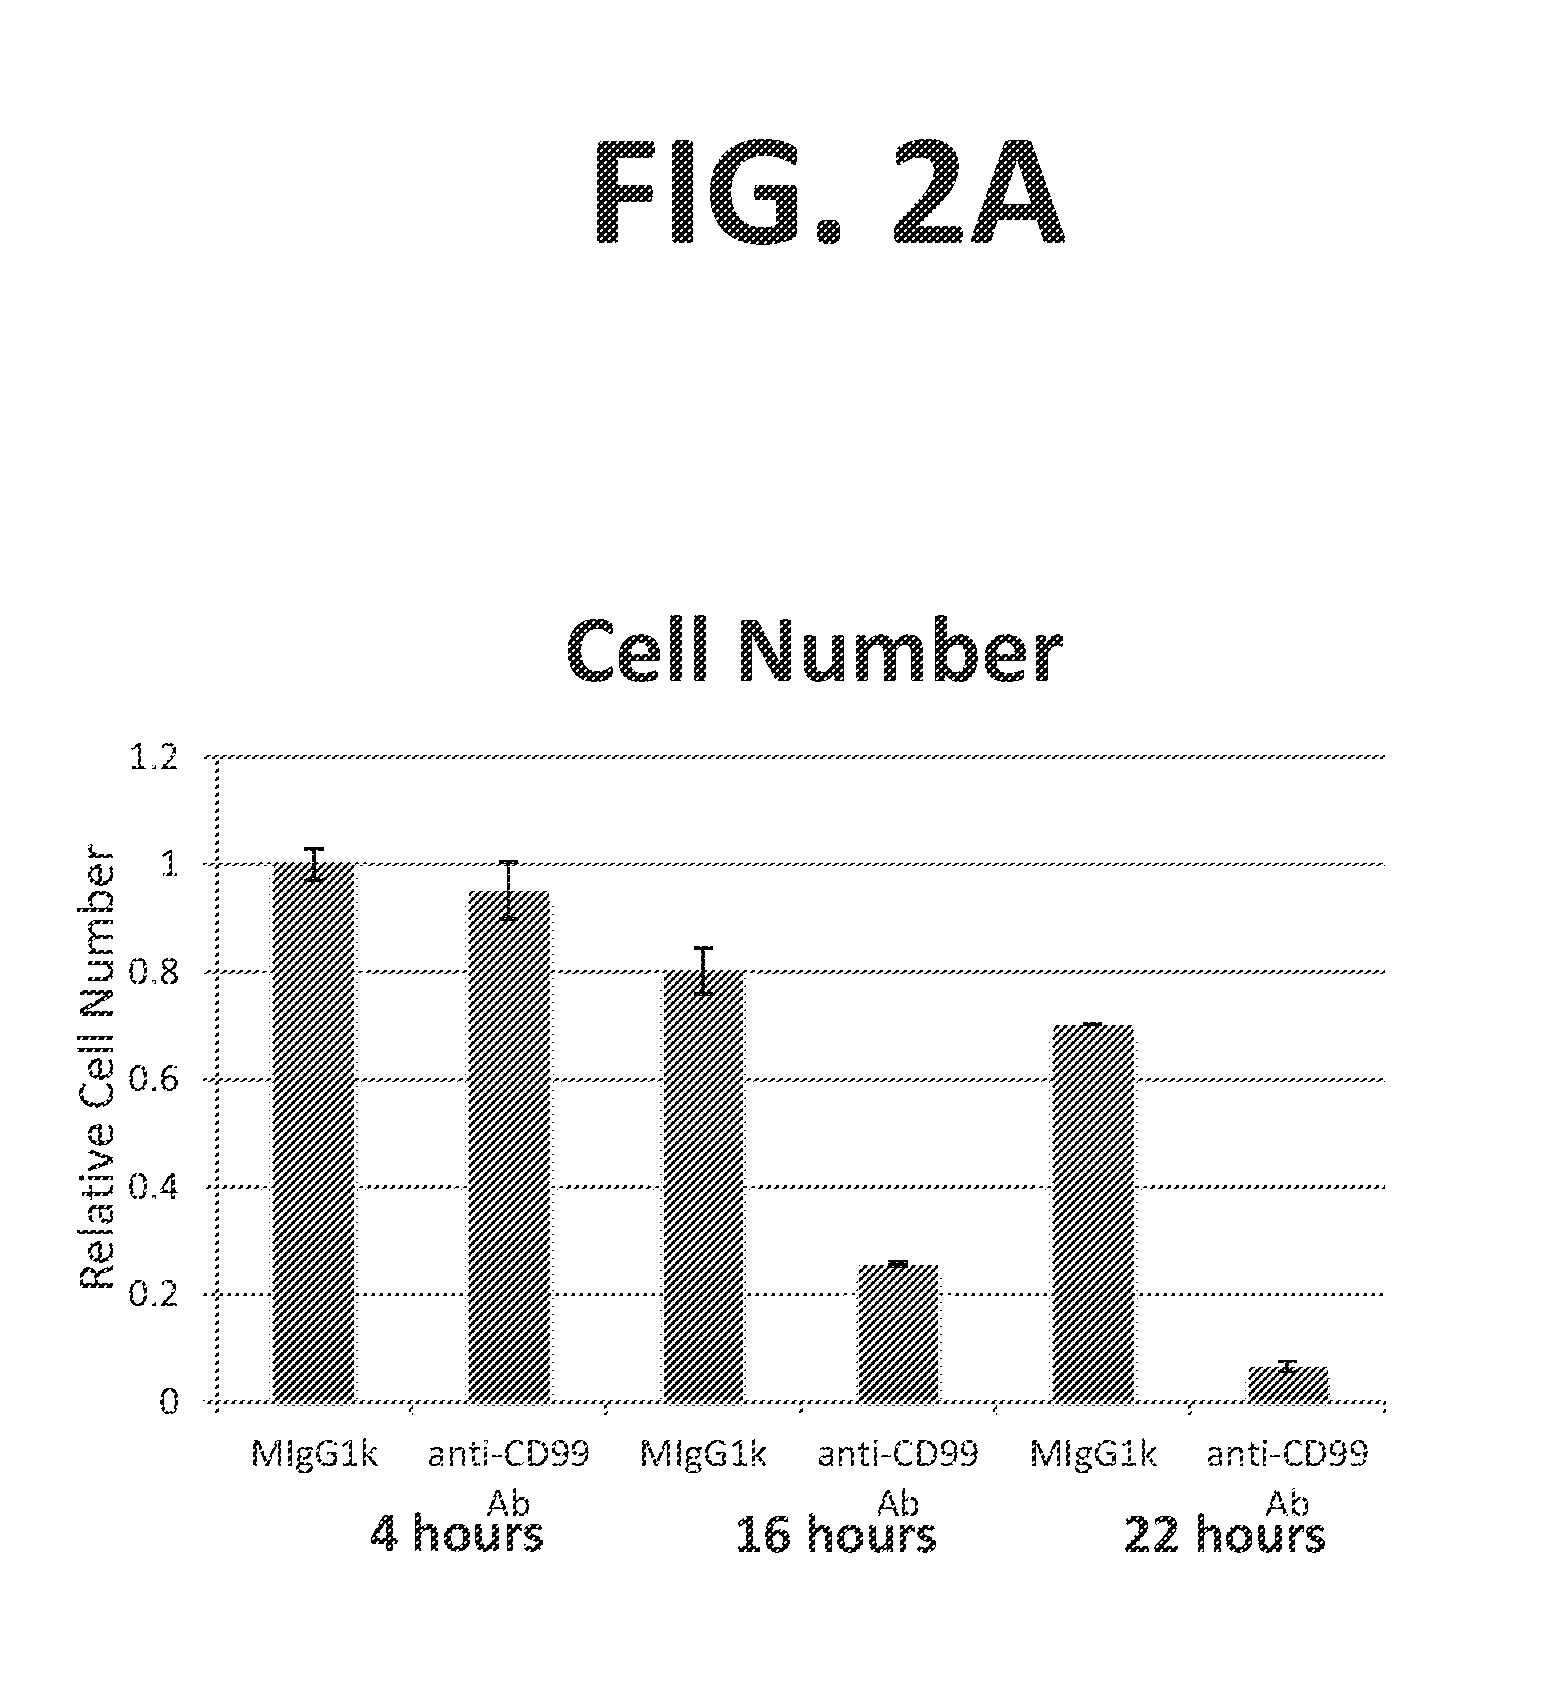 Compositions and Methods for the Treatment of Acute Myeloid Leukemias and Myelodysplastic Syndromes